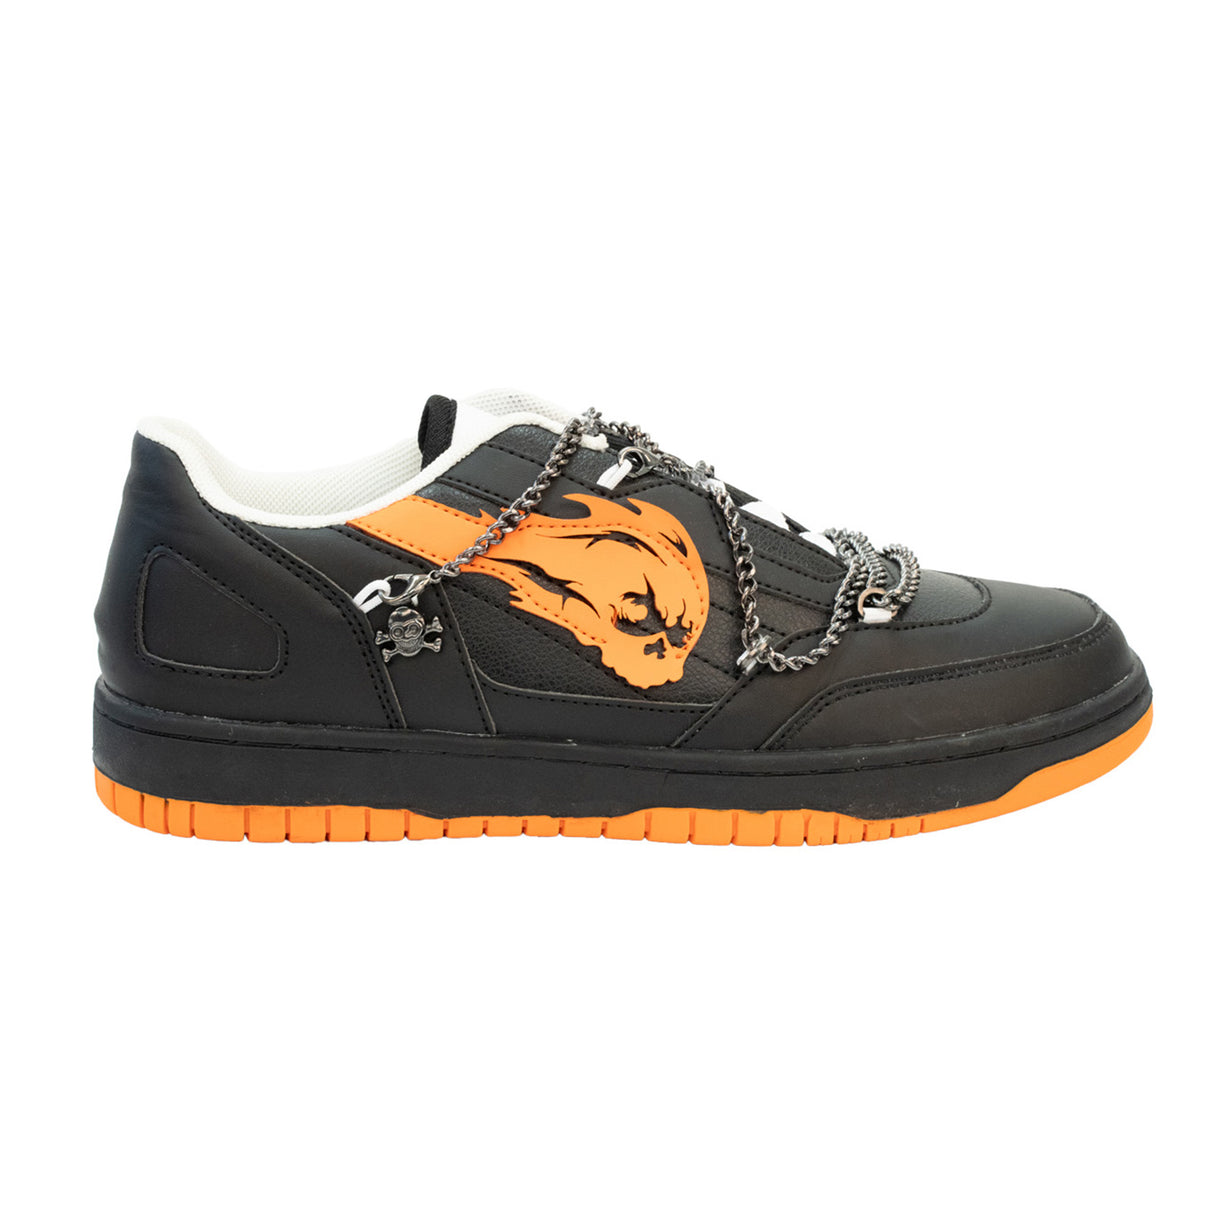 COURT CLASSIC SNEAKERS (HALLOWS EVE)